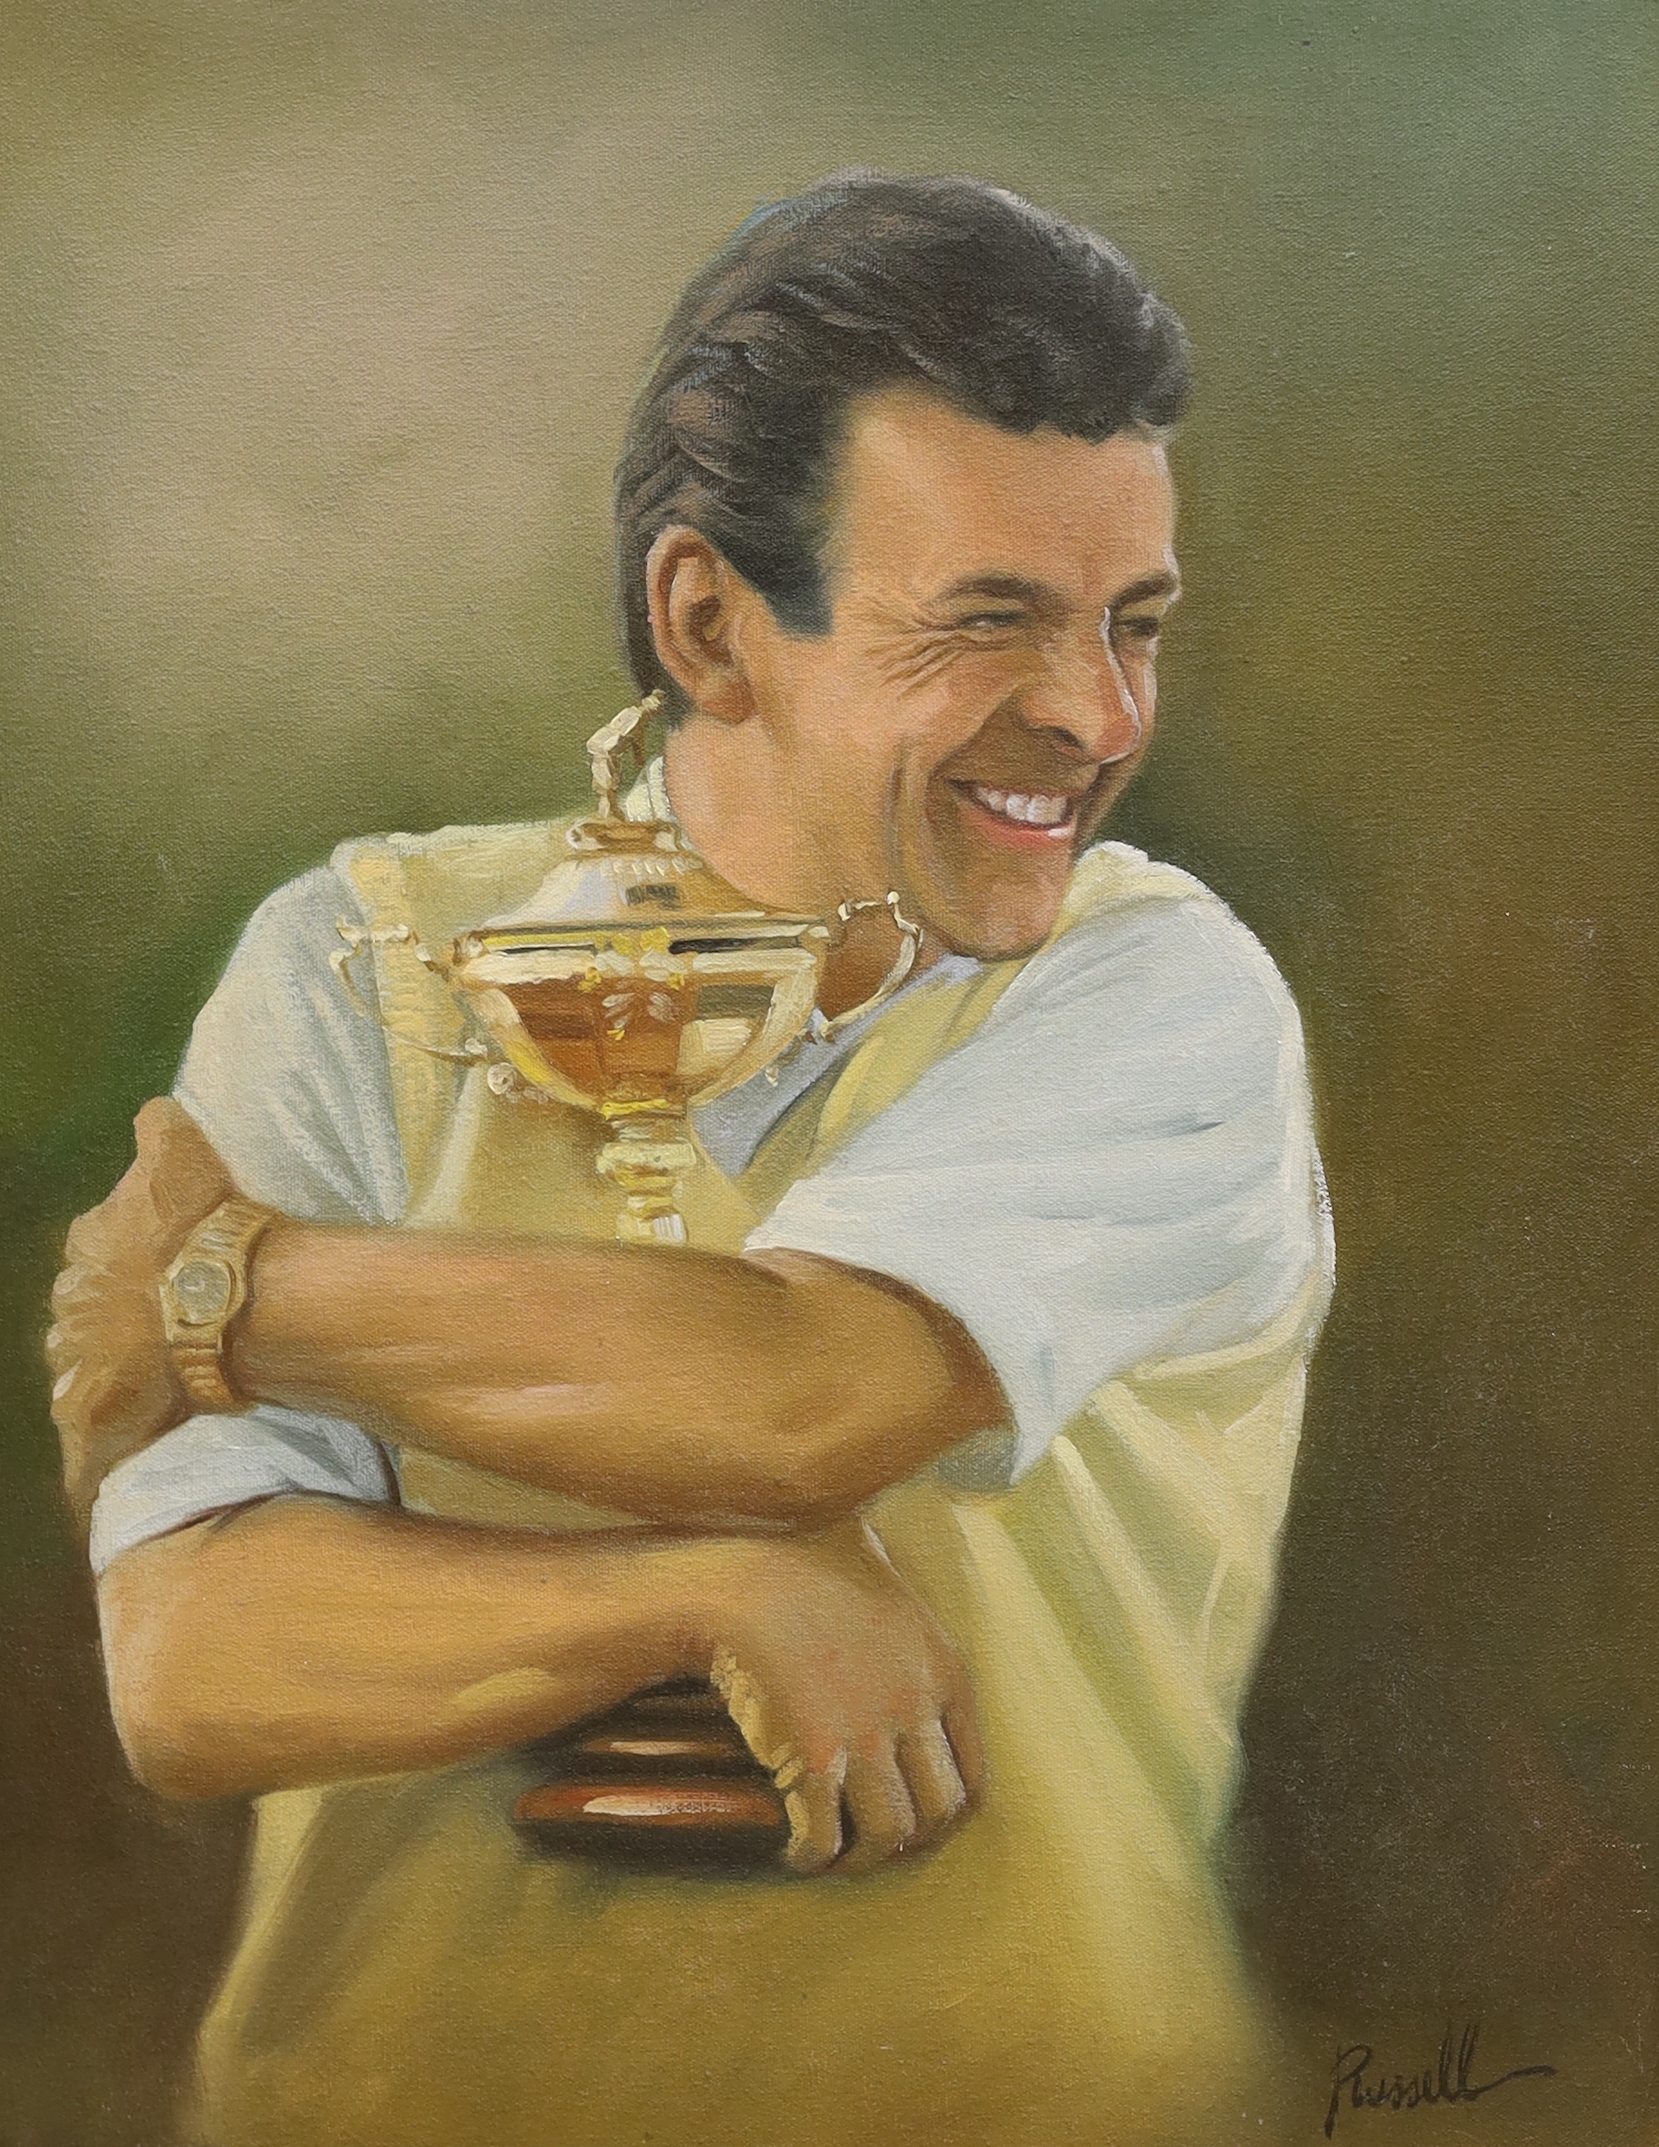 Russell, oil on canvas, Tony Jacklin embracing a trophy, 49 x 39cm